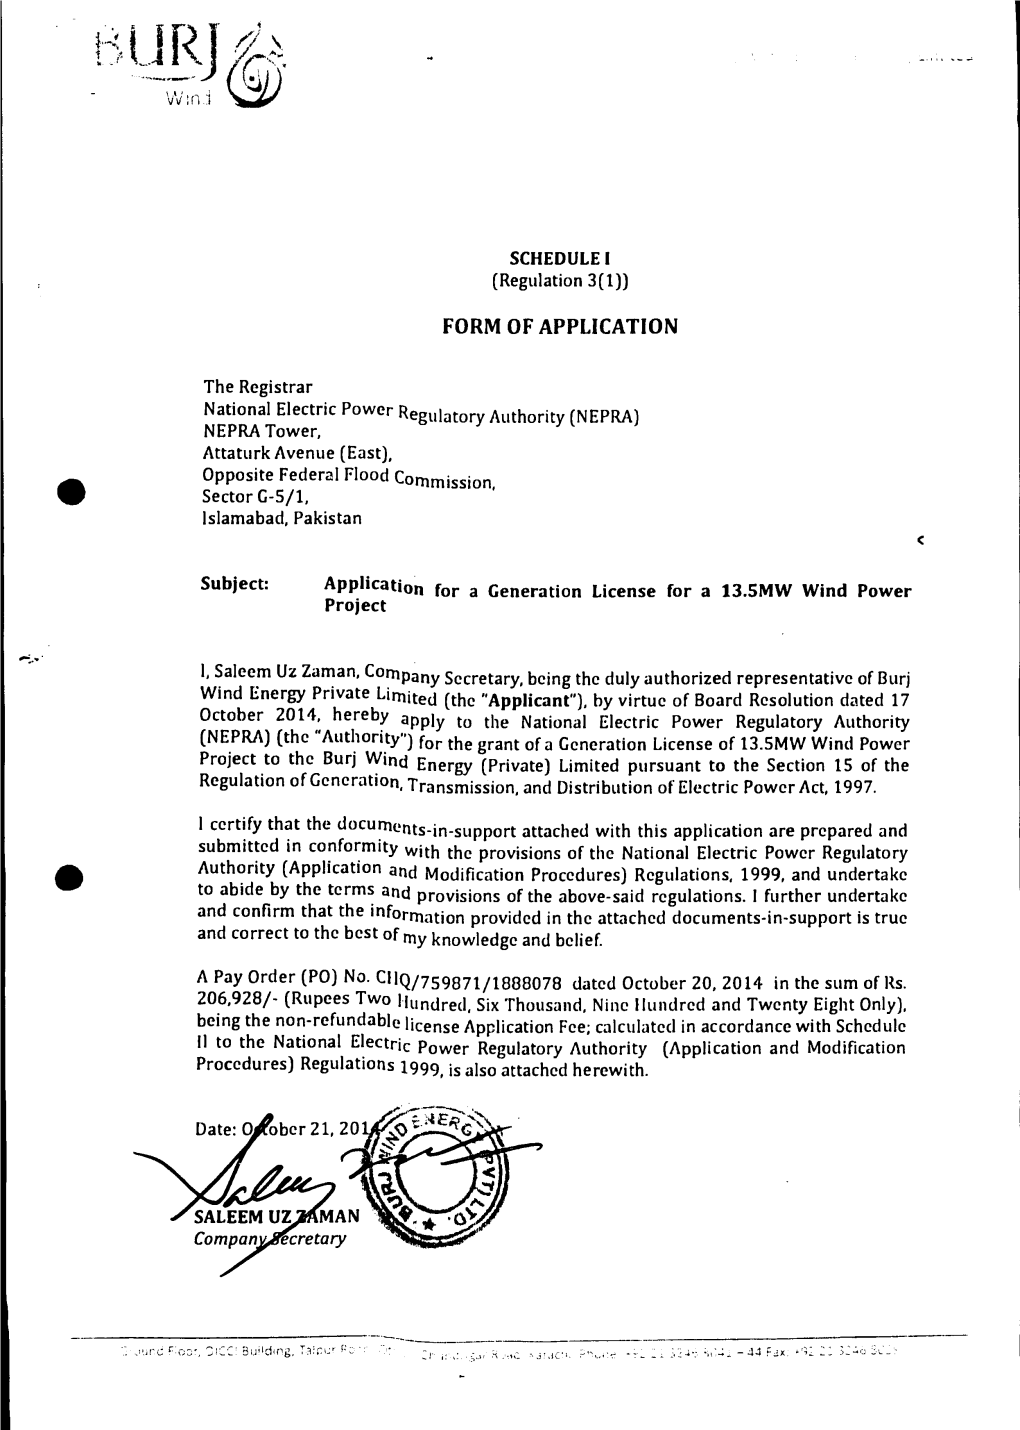 Application for a Generation License for a 13.5MW Wind Power Project